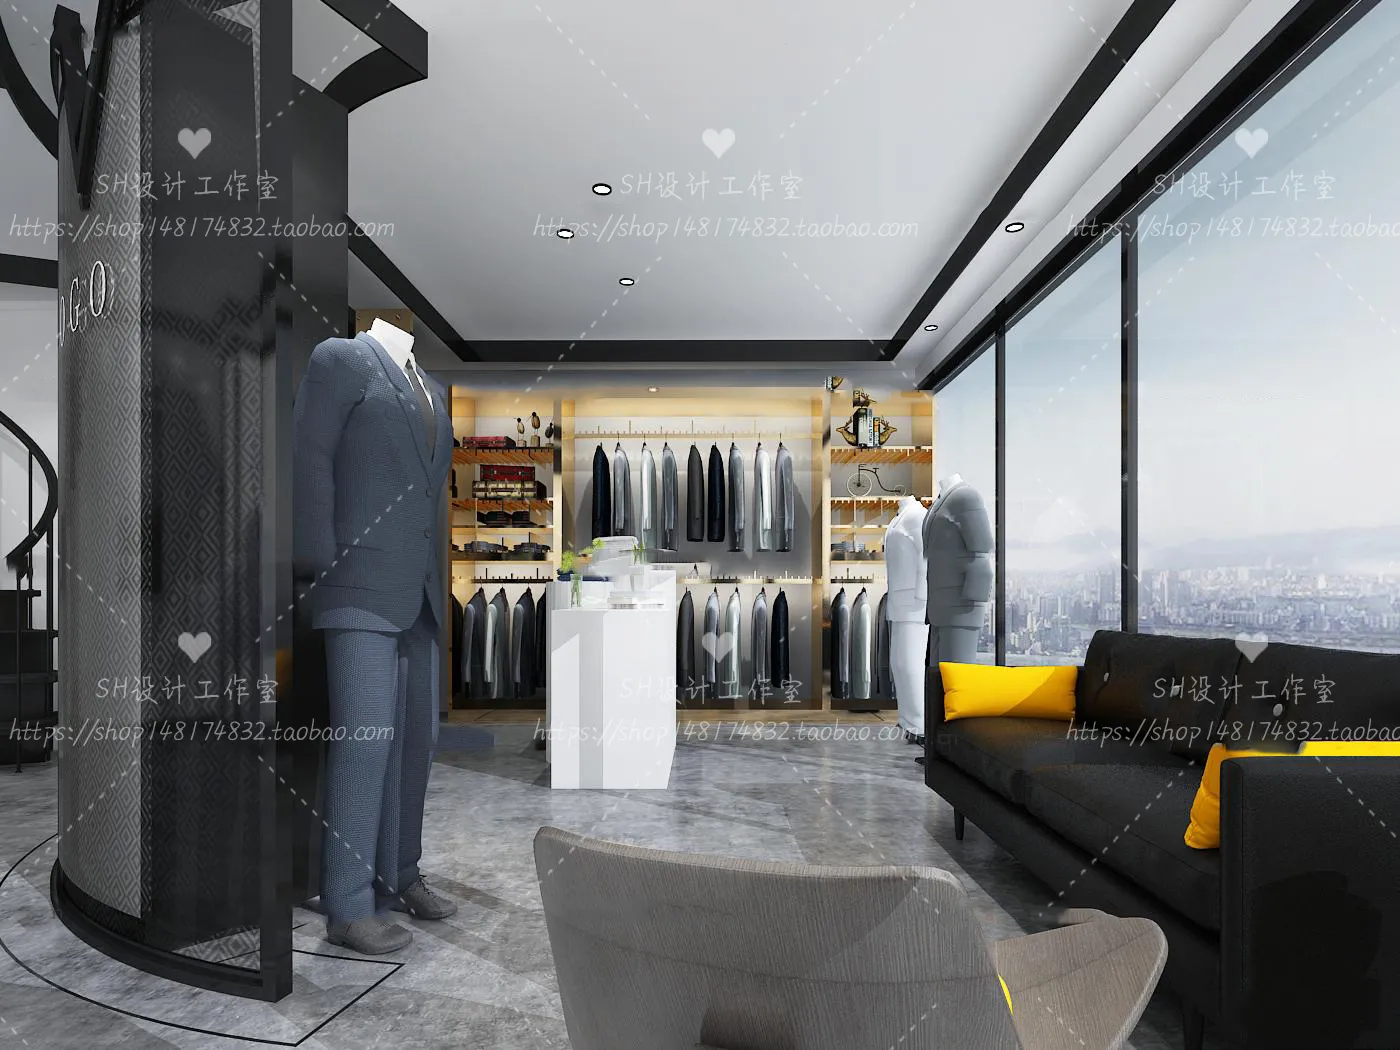 CLOTHING STORE 3D SCENES – VRAY RENDER – 108